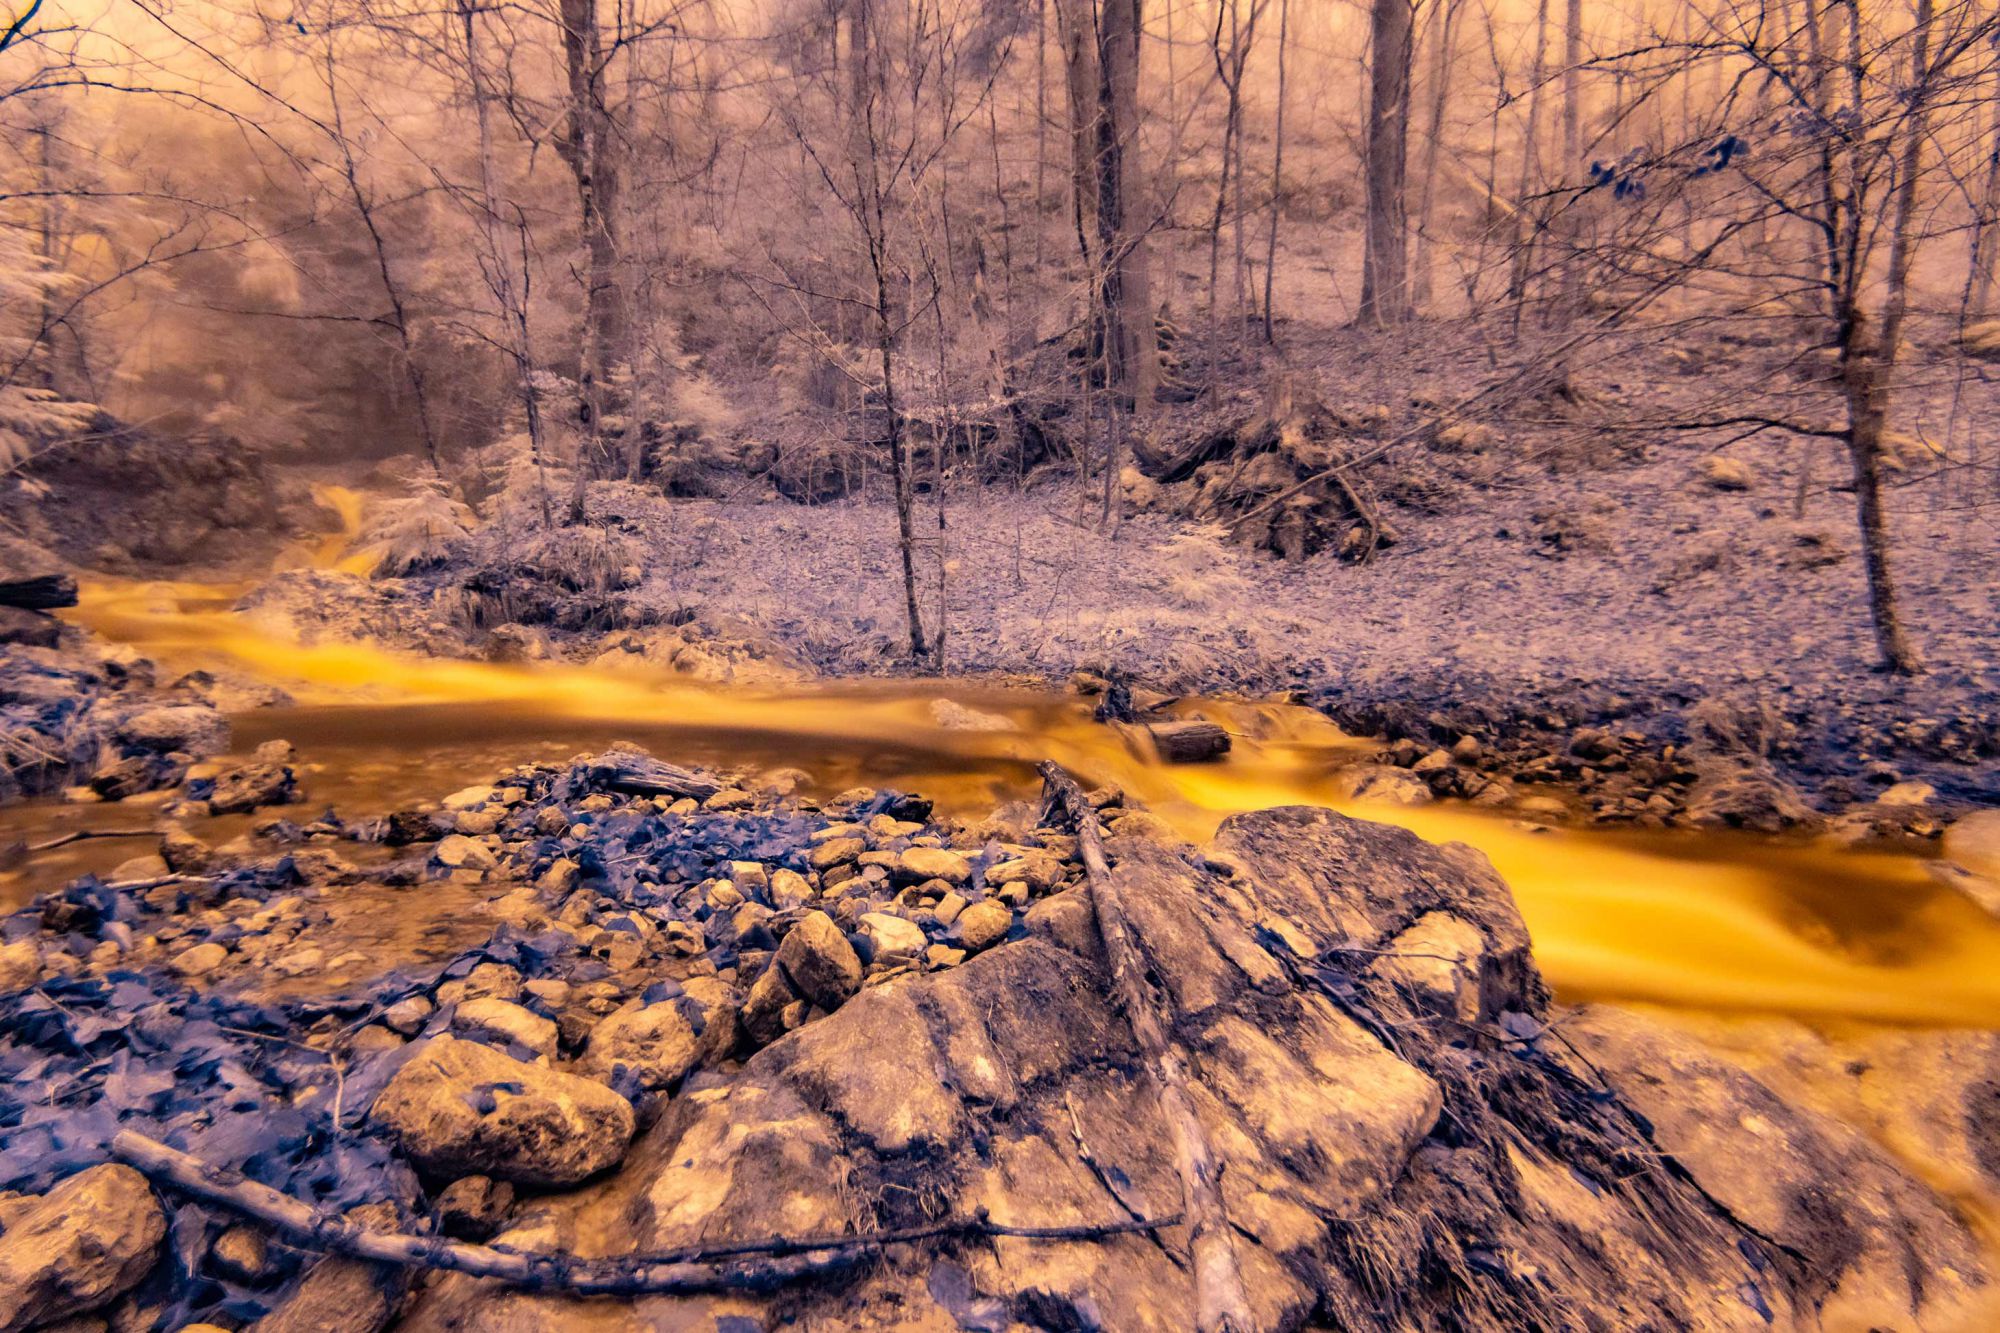 River of Gold - Feb 2021